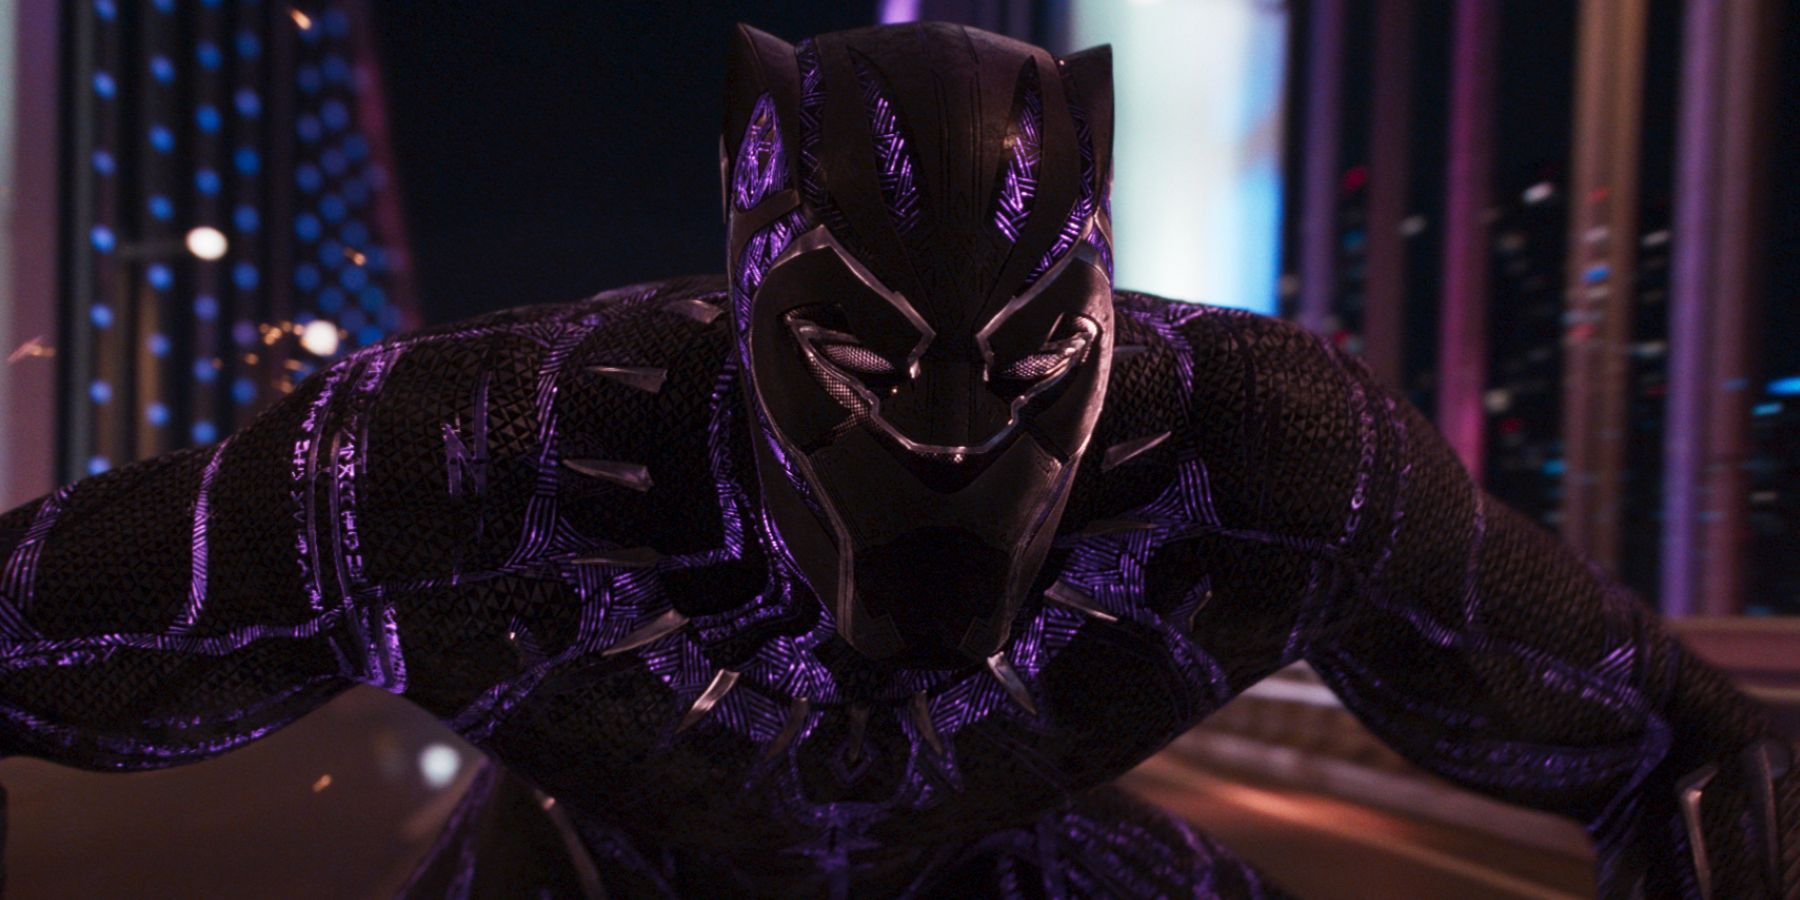 Black Panther's suit with purple lighting 